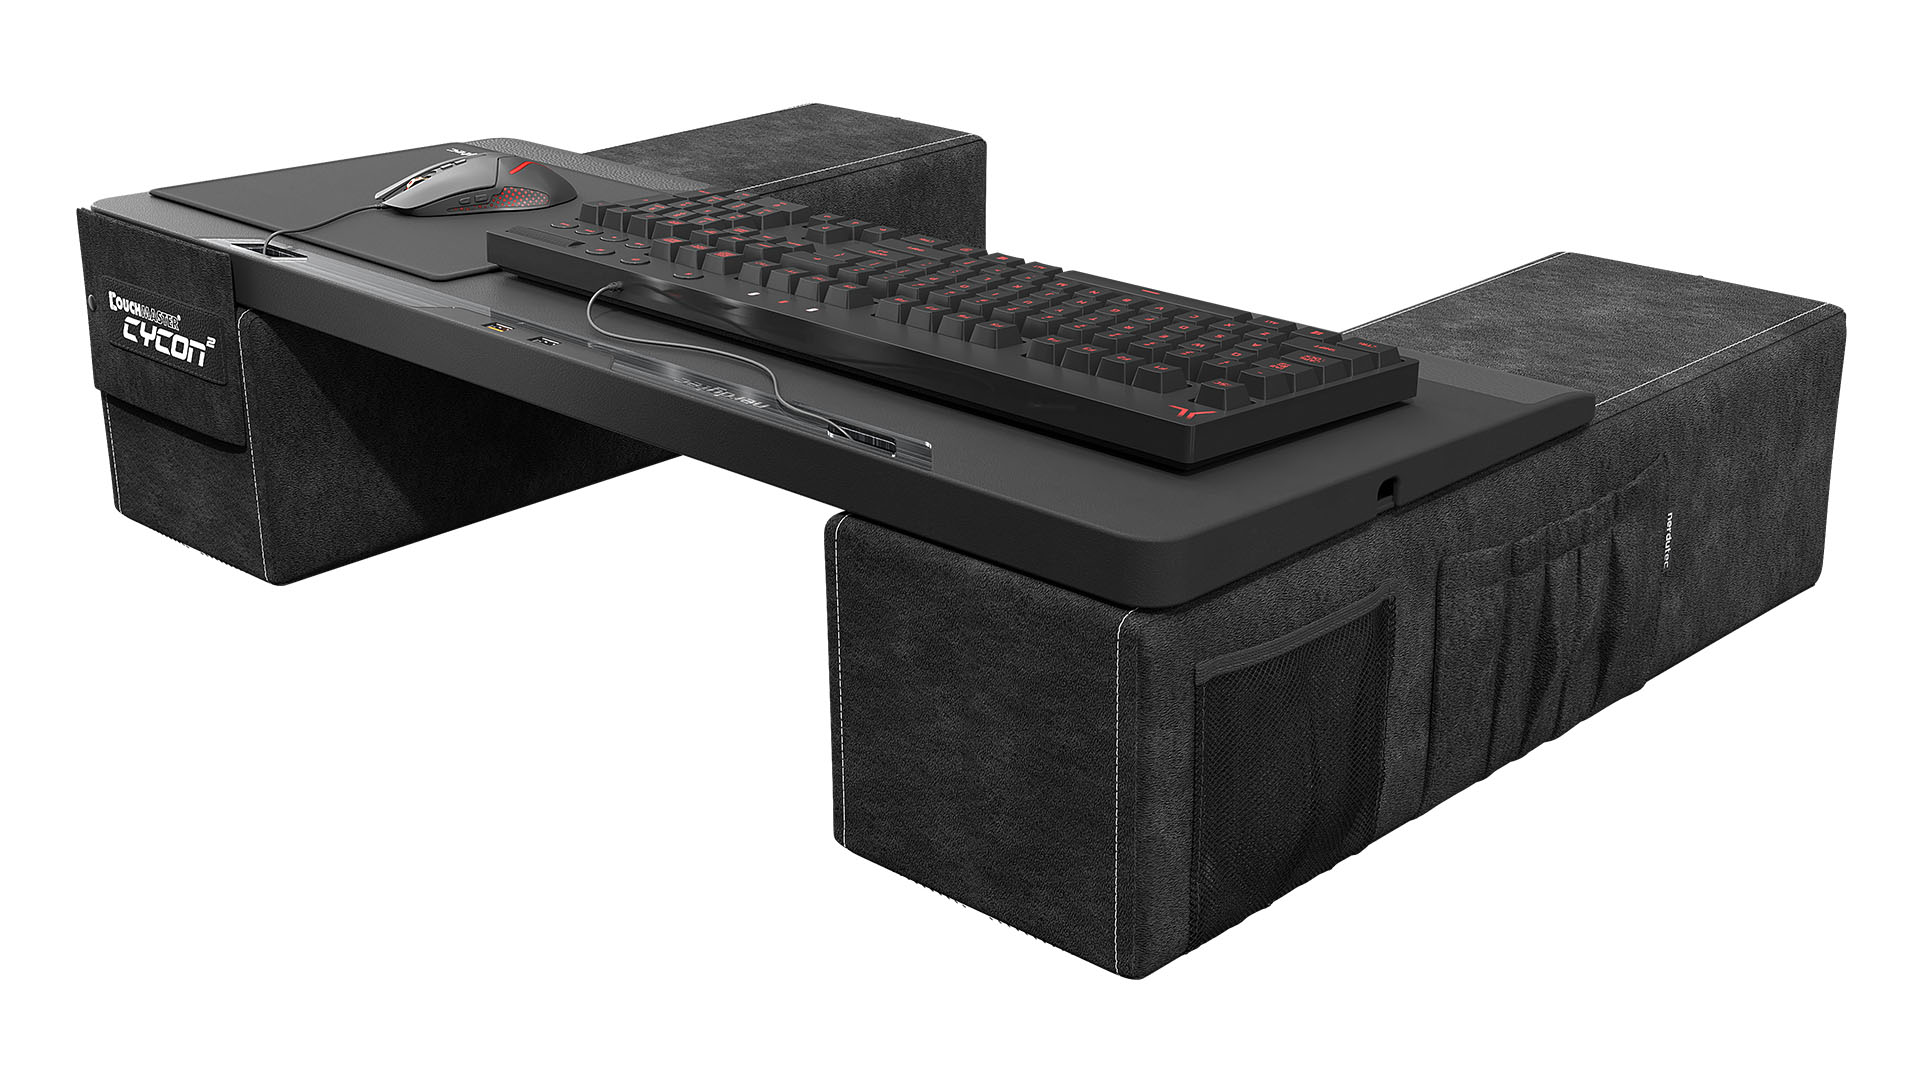 The Couchmaster Is a Lap Desk That Creates a Workstation Right On Your Couch